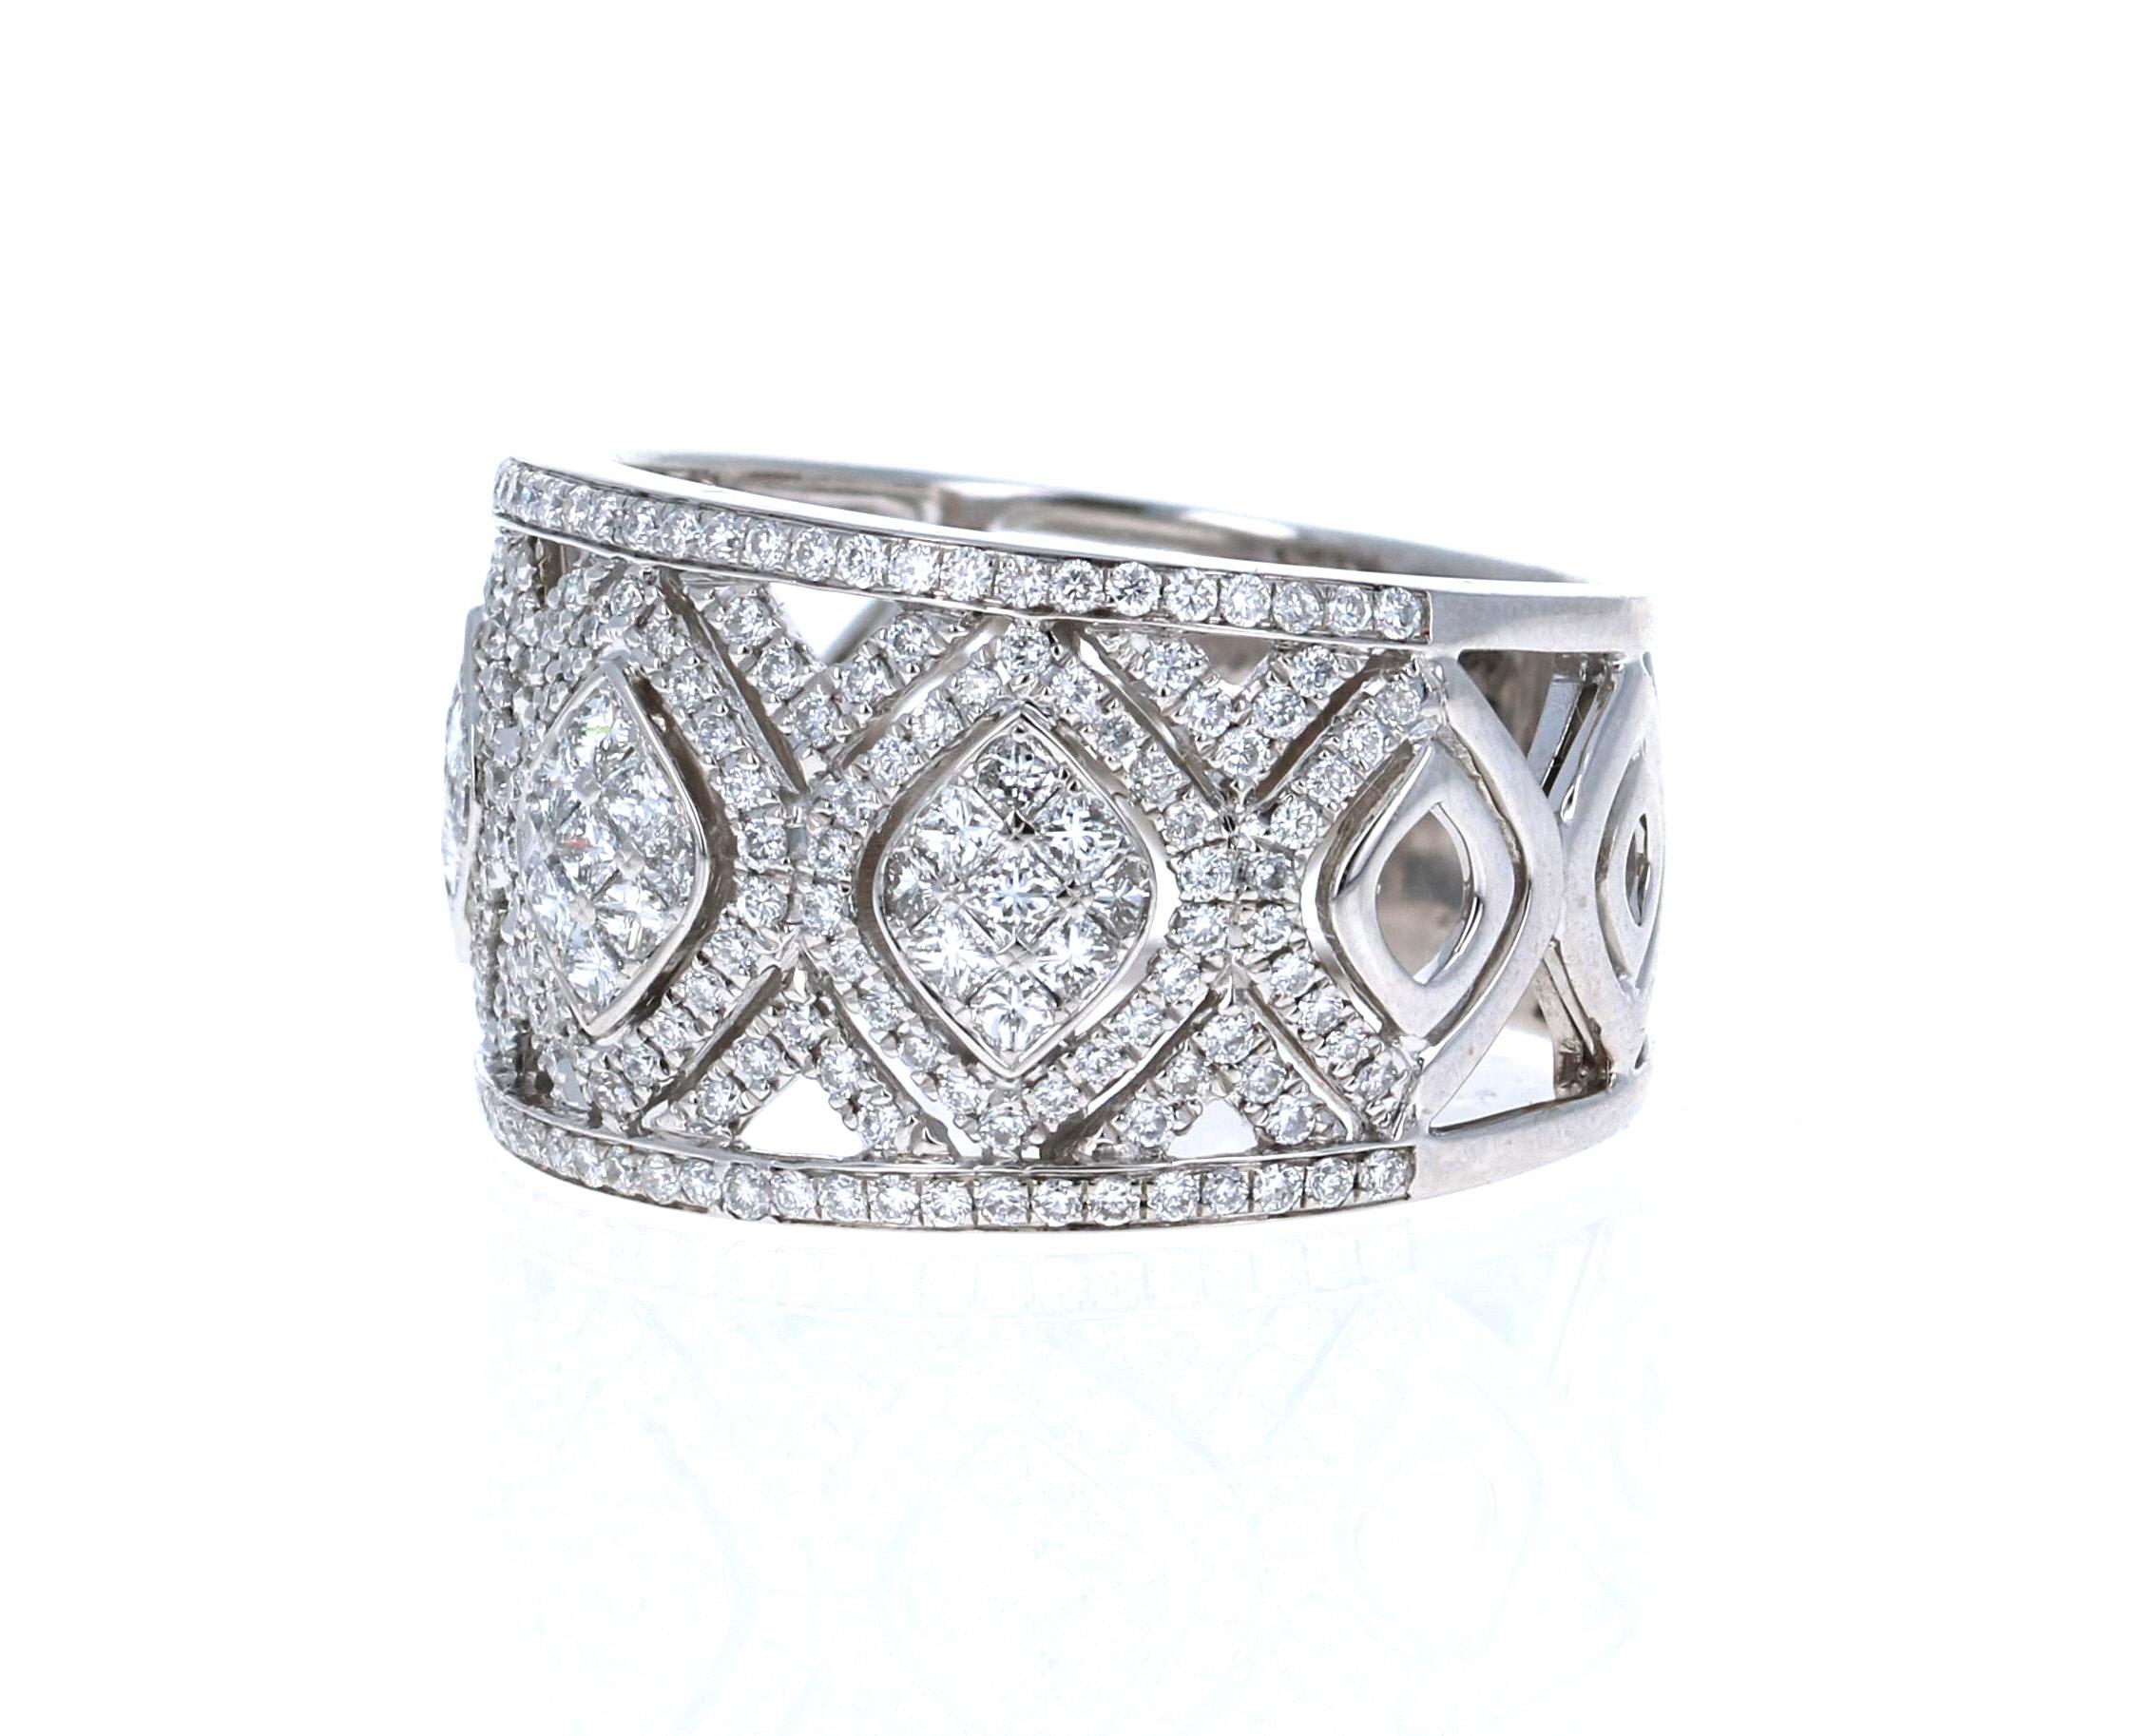 1.00 Carat Diamond 18 Karat White Gold Vintage Cocktail Band!
This gorgeous vintage beauty  is sure to make heads turn! 

It has 217 Round Cut & Princess Cut Diamonds that weigh 1.00 Carats. The Clarity and Color of the Diamonds are VS2-F. 

Curated